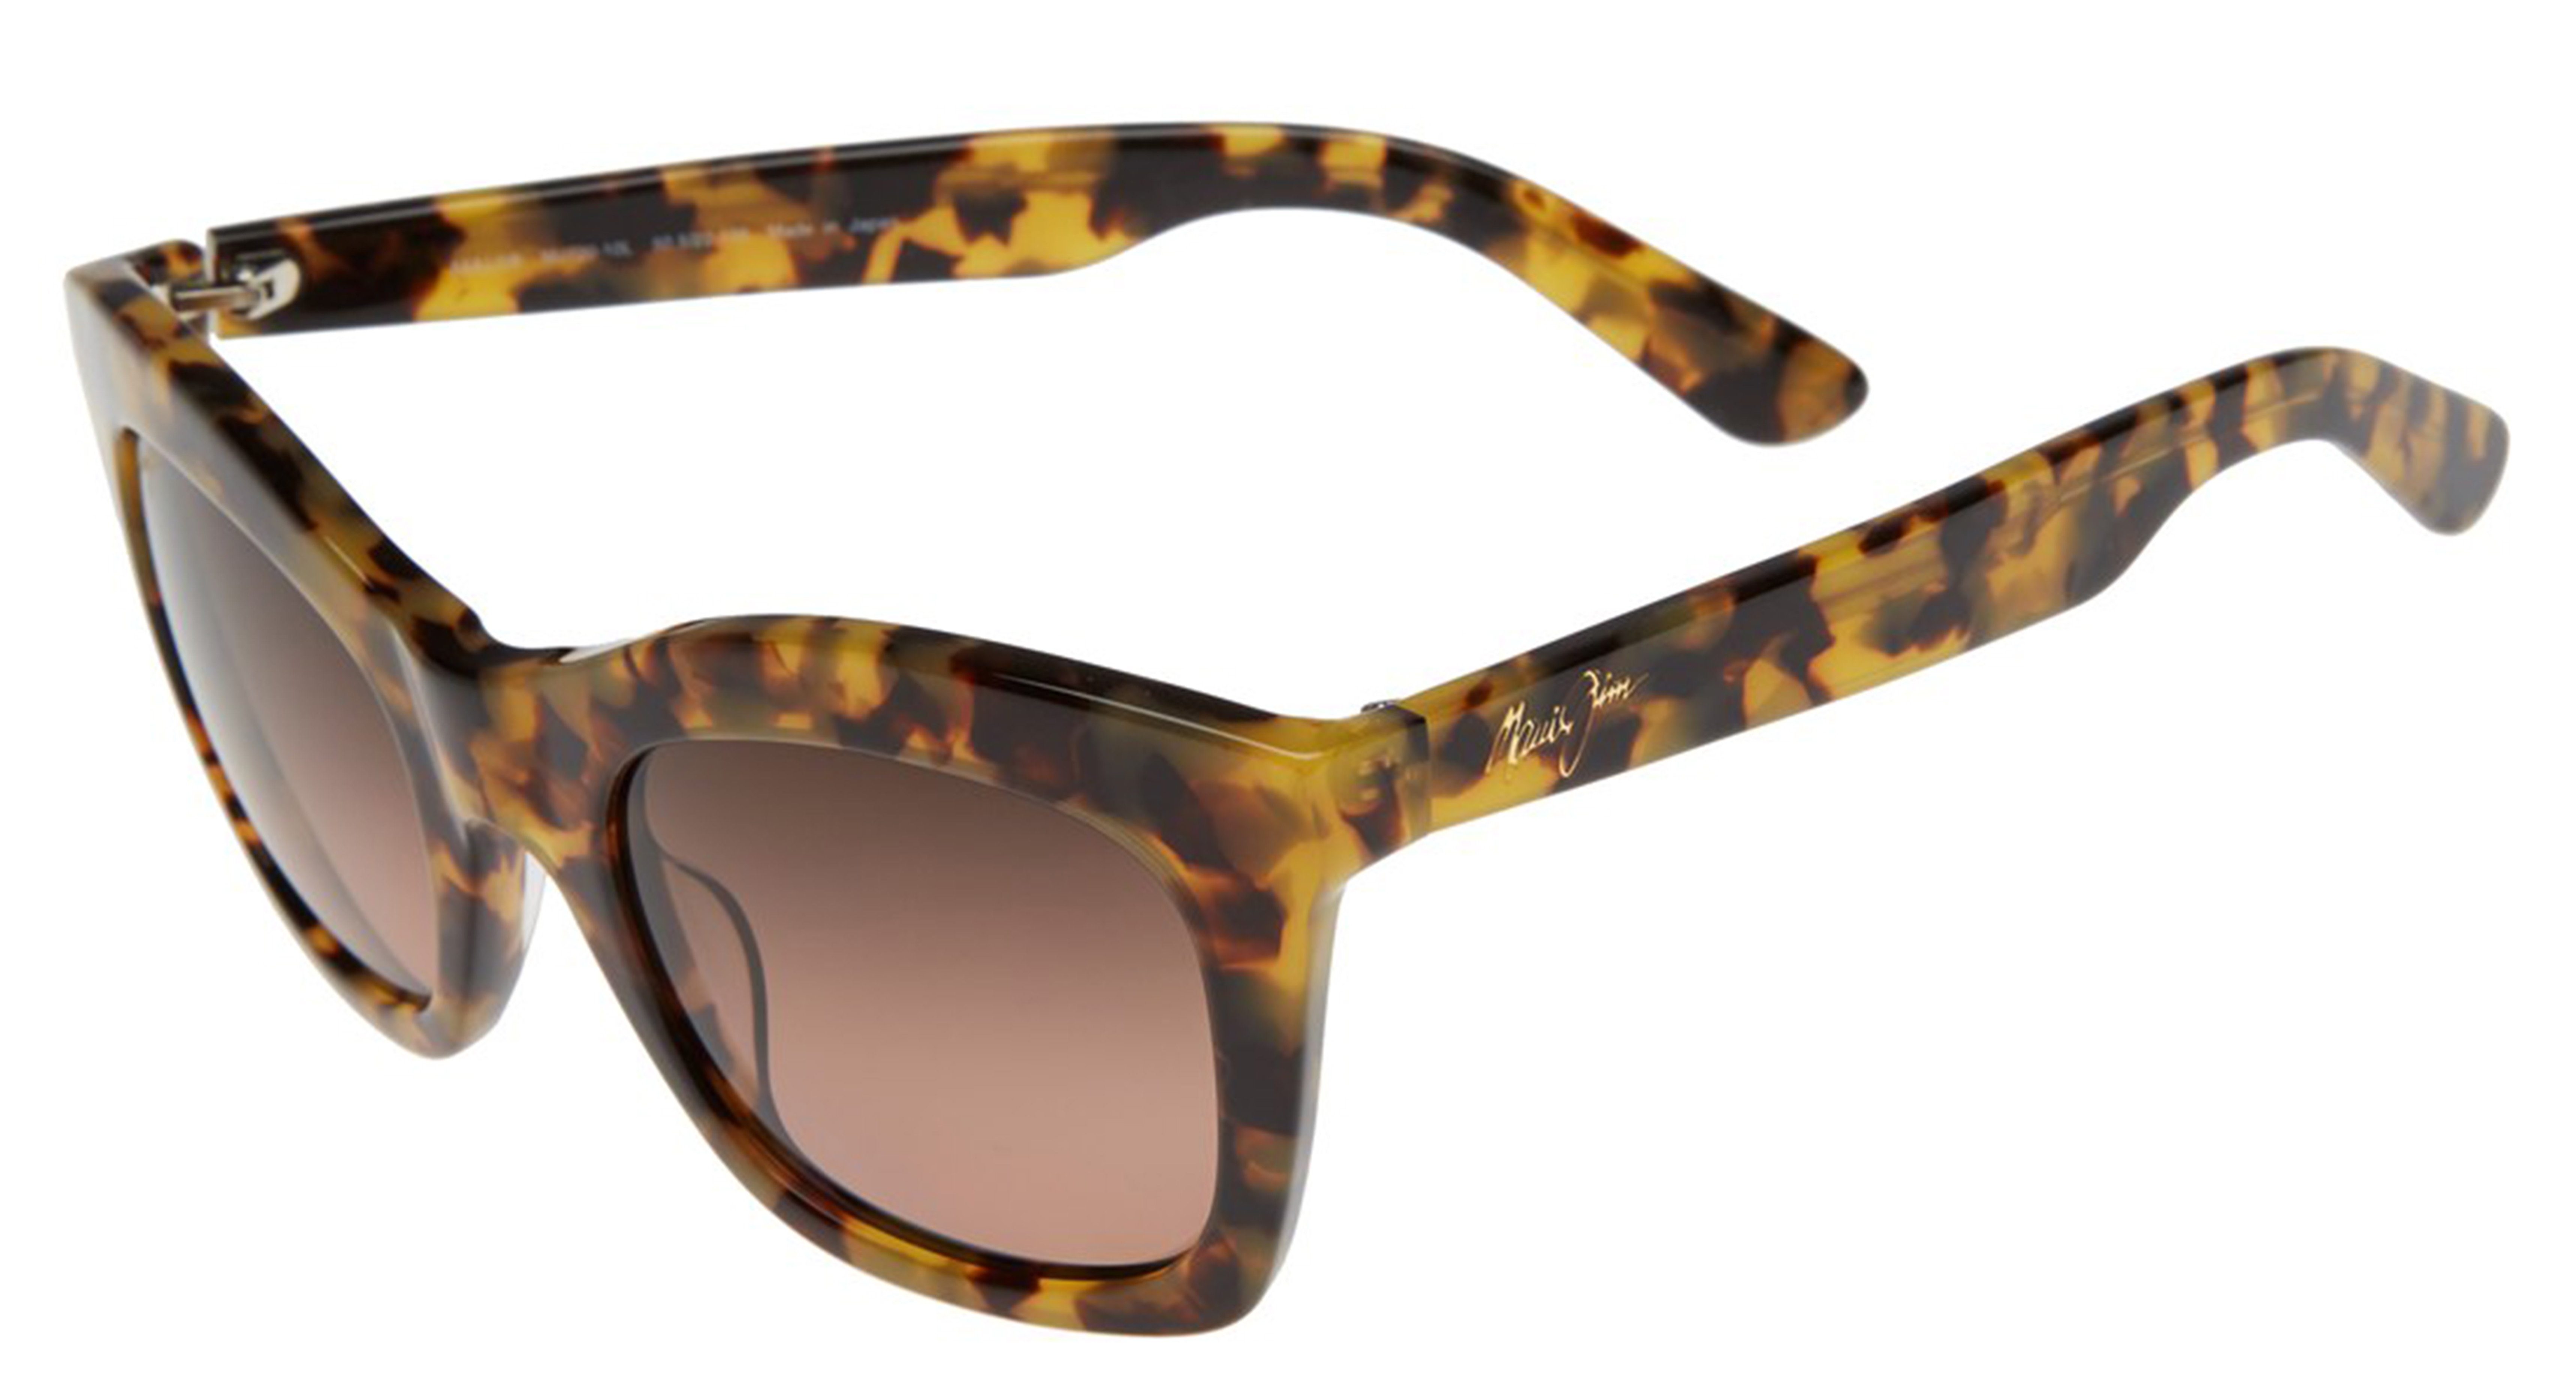 Ode to Womanhood: Maui Jim’s Latest Coco Palms is a Refined Cat Eyed Frame for Lovers of Feminine Vintage Styles